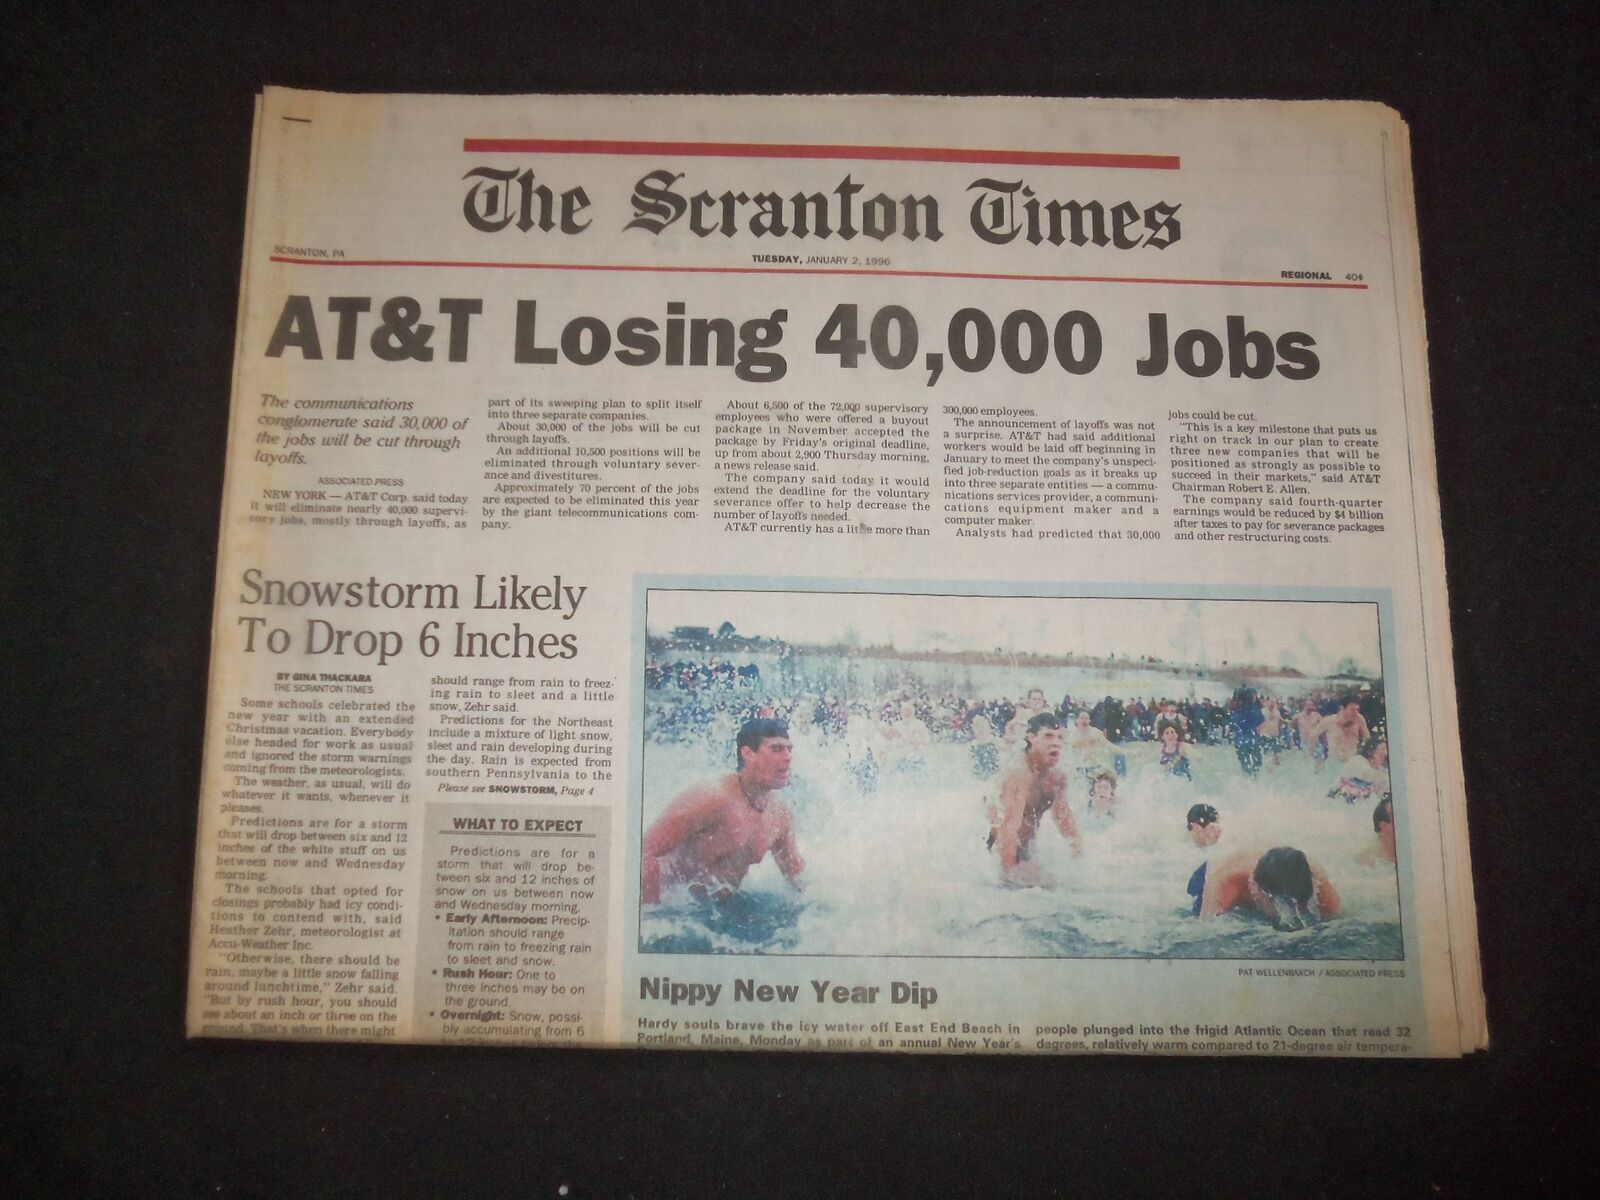 1996 JANUARY 2 THE SCRANTON TIMES NEWSPAPER - AT&T LOSING 40,000 JOBS - NP 8347